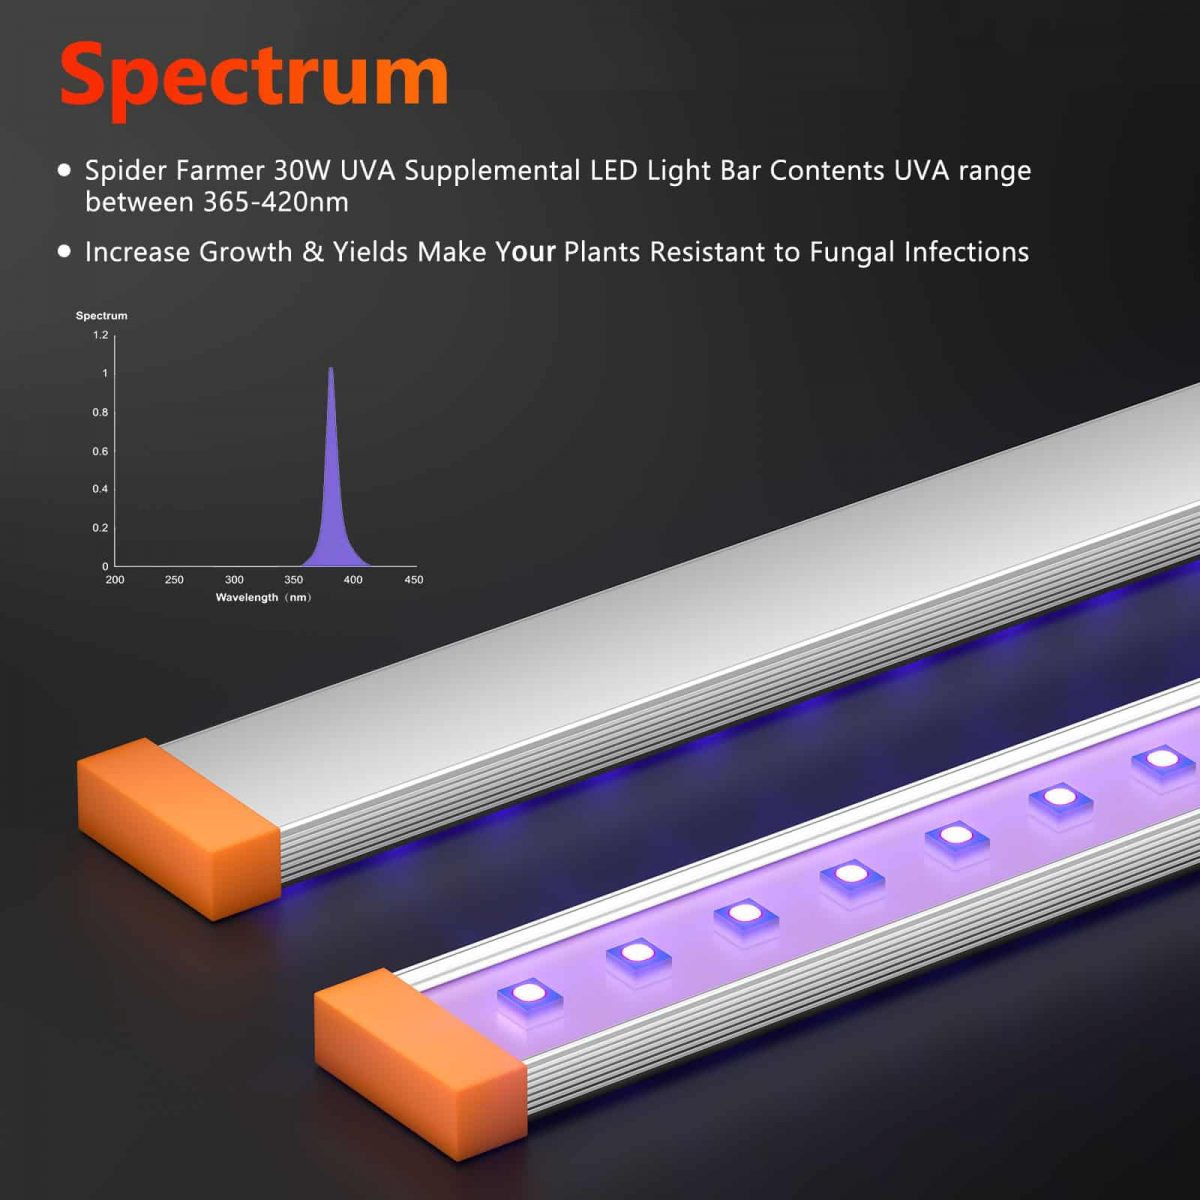 Spider Farmer 30W UV LED grow light bar, designed to provide ultraviolet light for optimal growth and health of indoor plants.